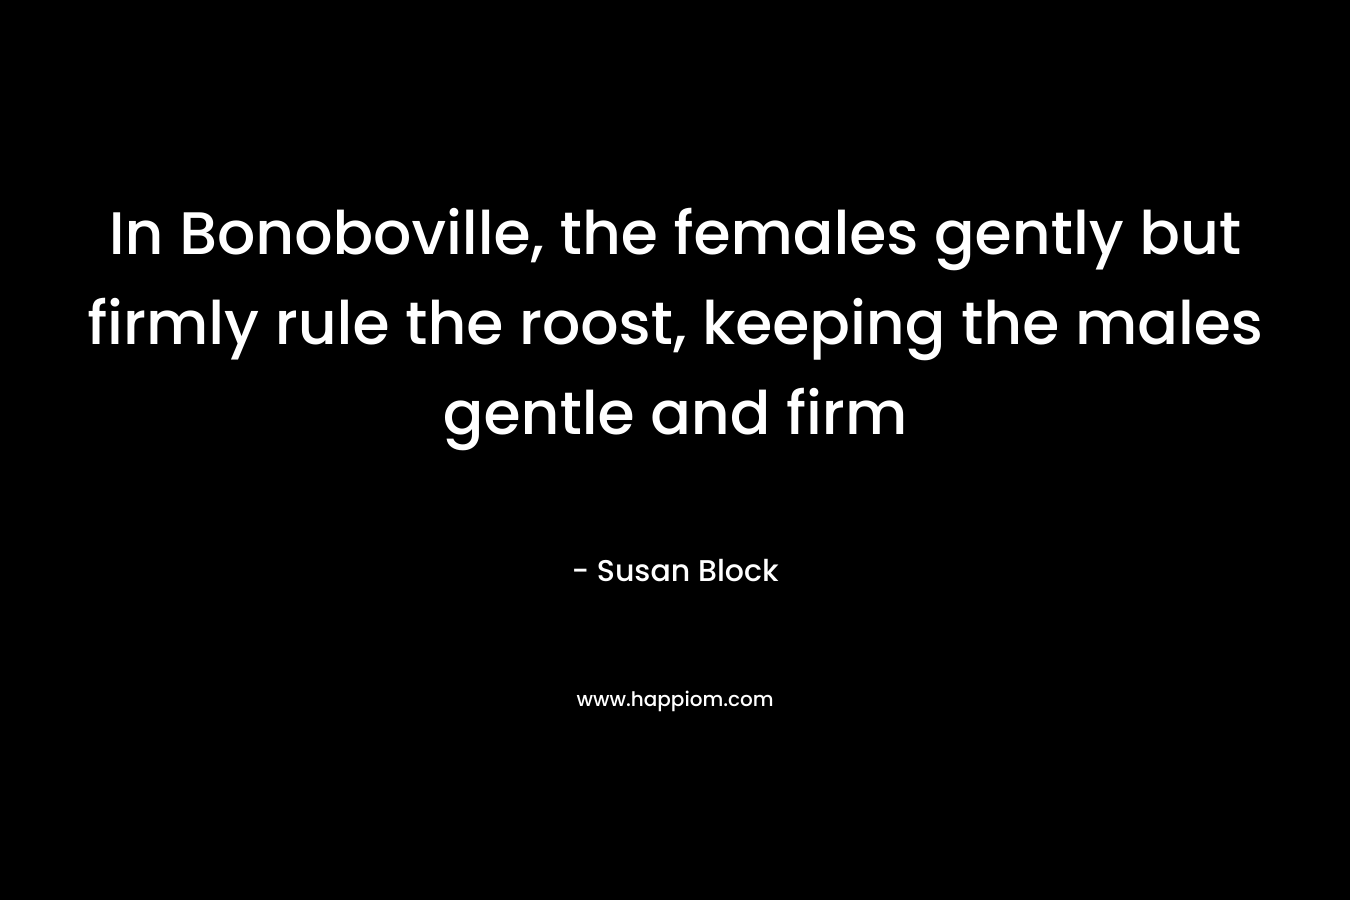 In Bonoboville, the females gently but firmly rule the roost, keeping the males gentle and firm